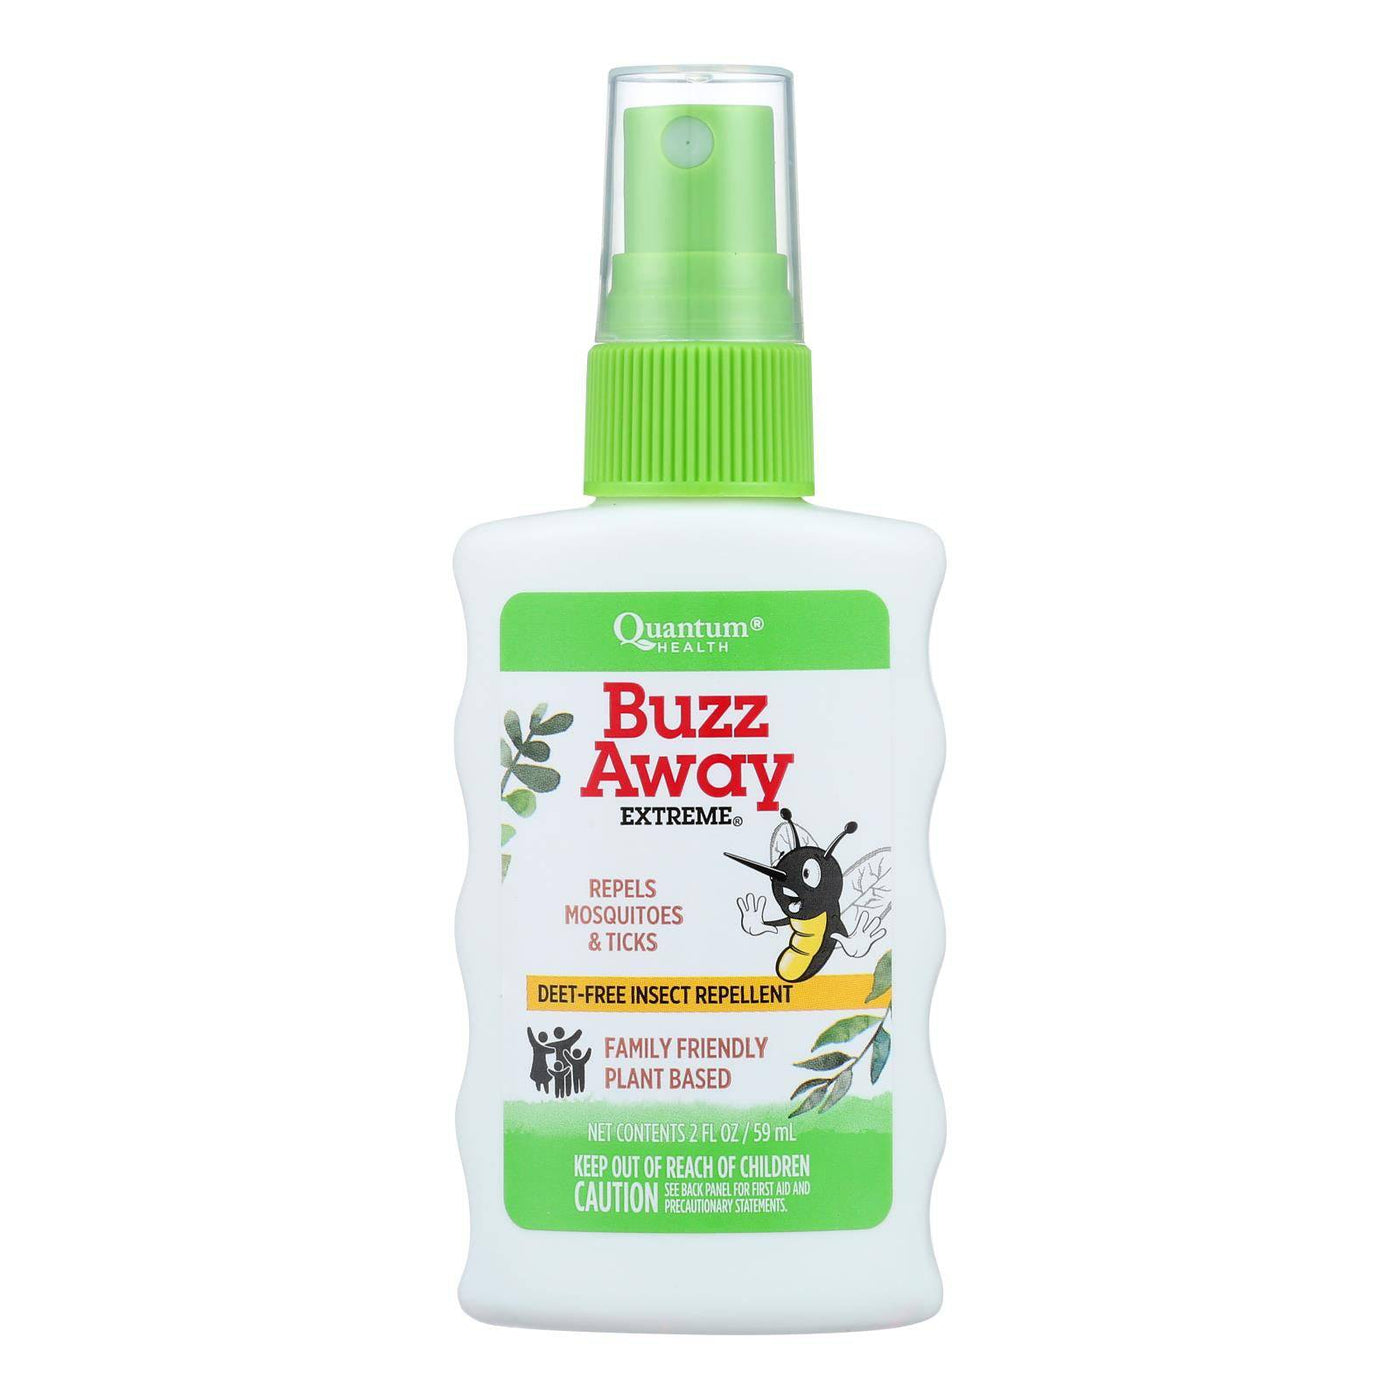 Buy Quantum Buzz Away Extreme Insect Repellent - 2 Fl Oz  at OnlyNaturals.us